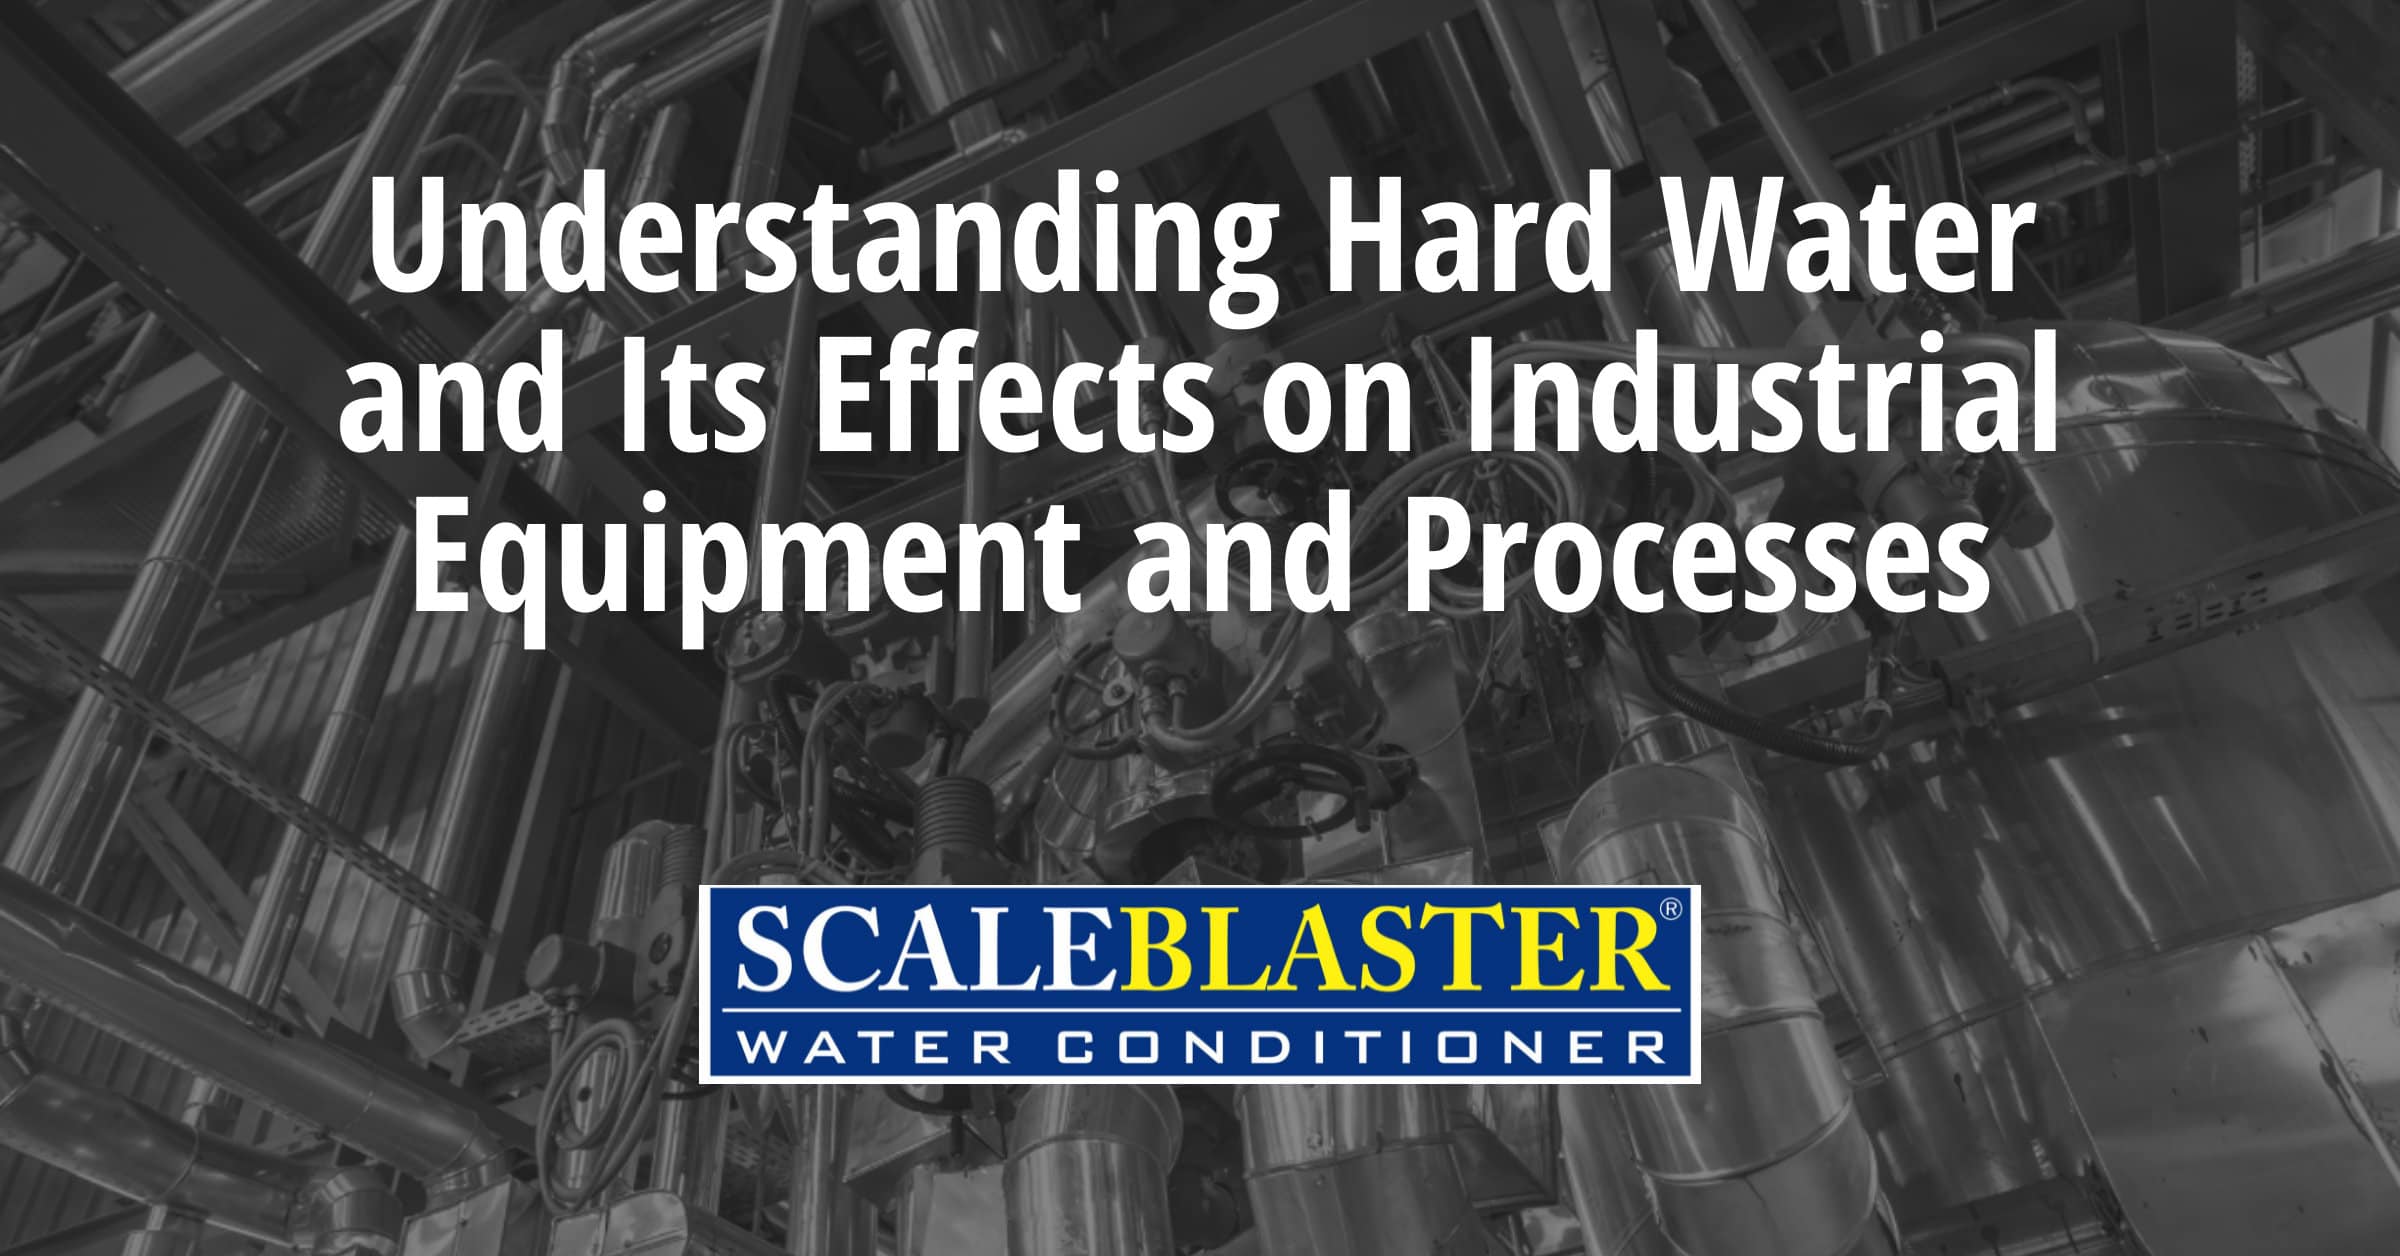 Understanding Hard Water and Its Effects on Industrial Equipment and Processes - Understanding Hard Water and Its Effects on Industrial Equipment and Processes